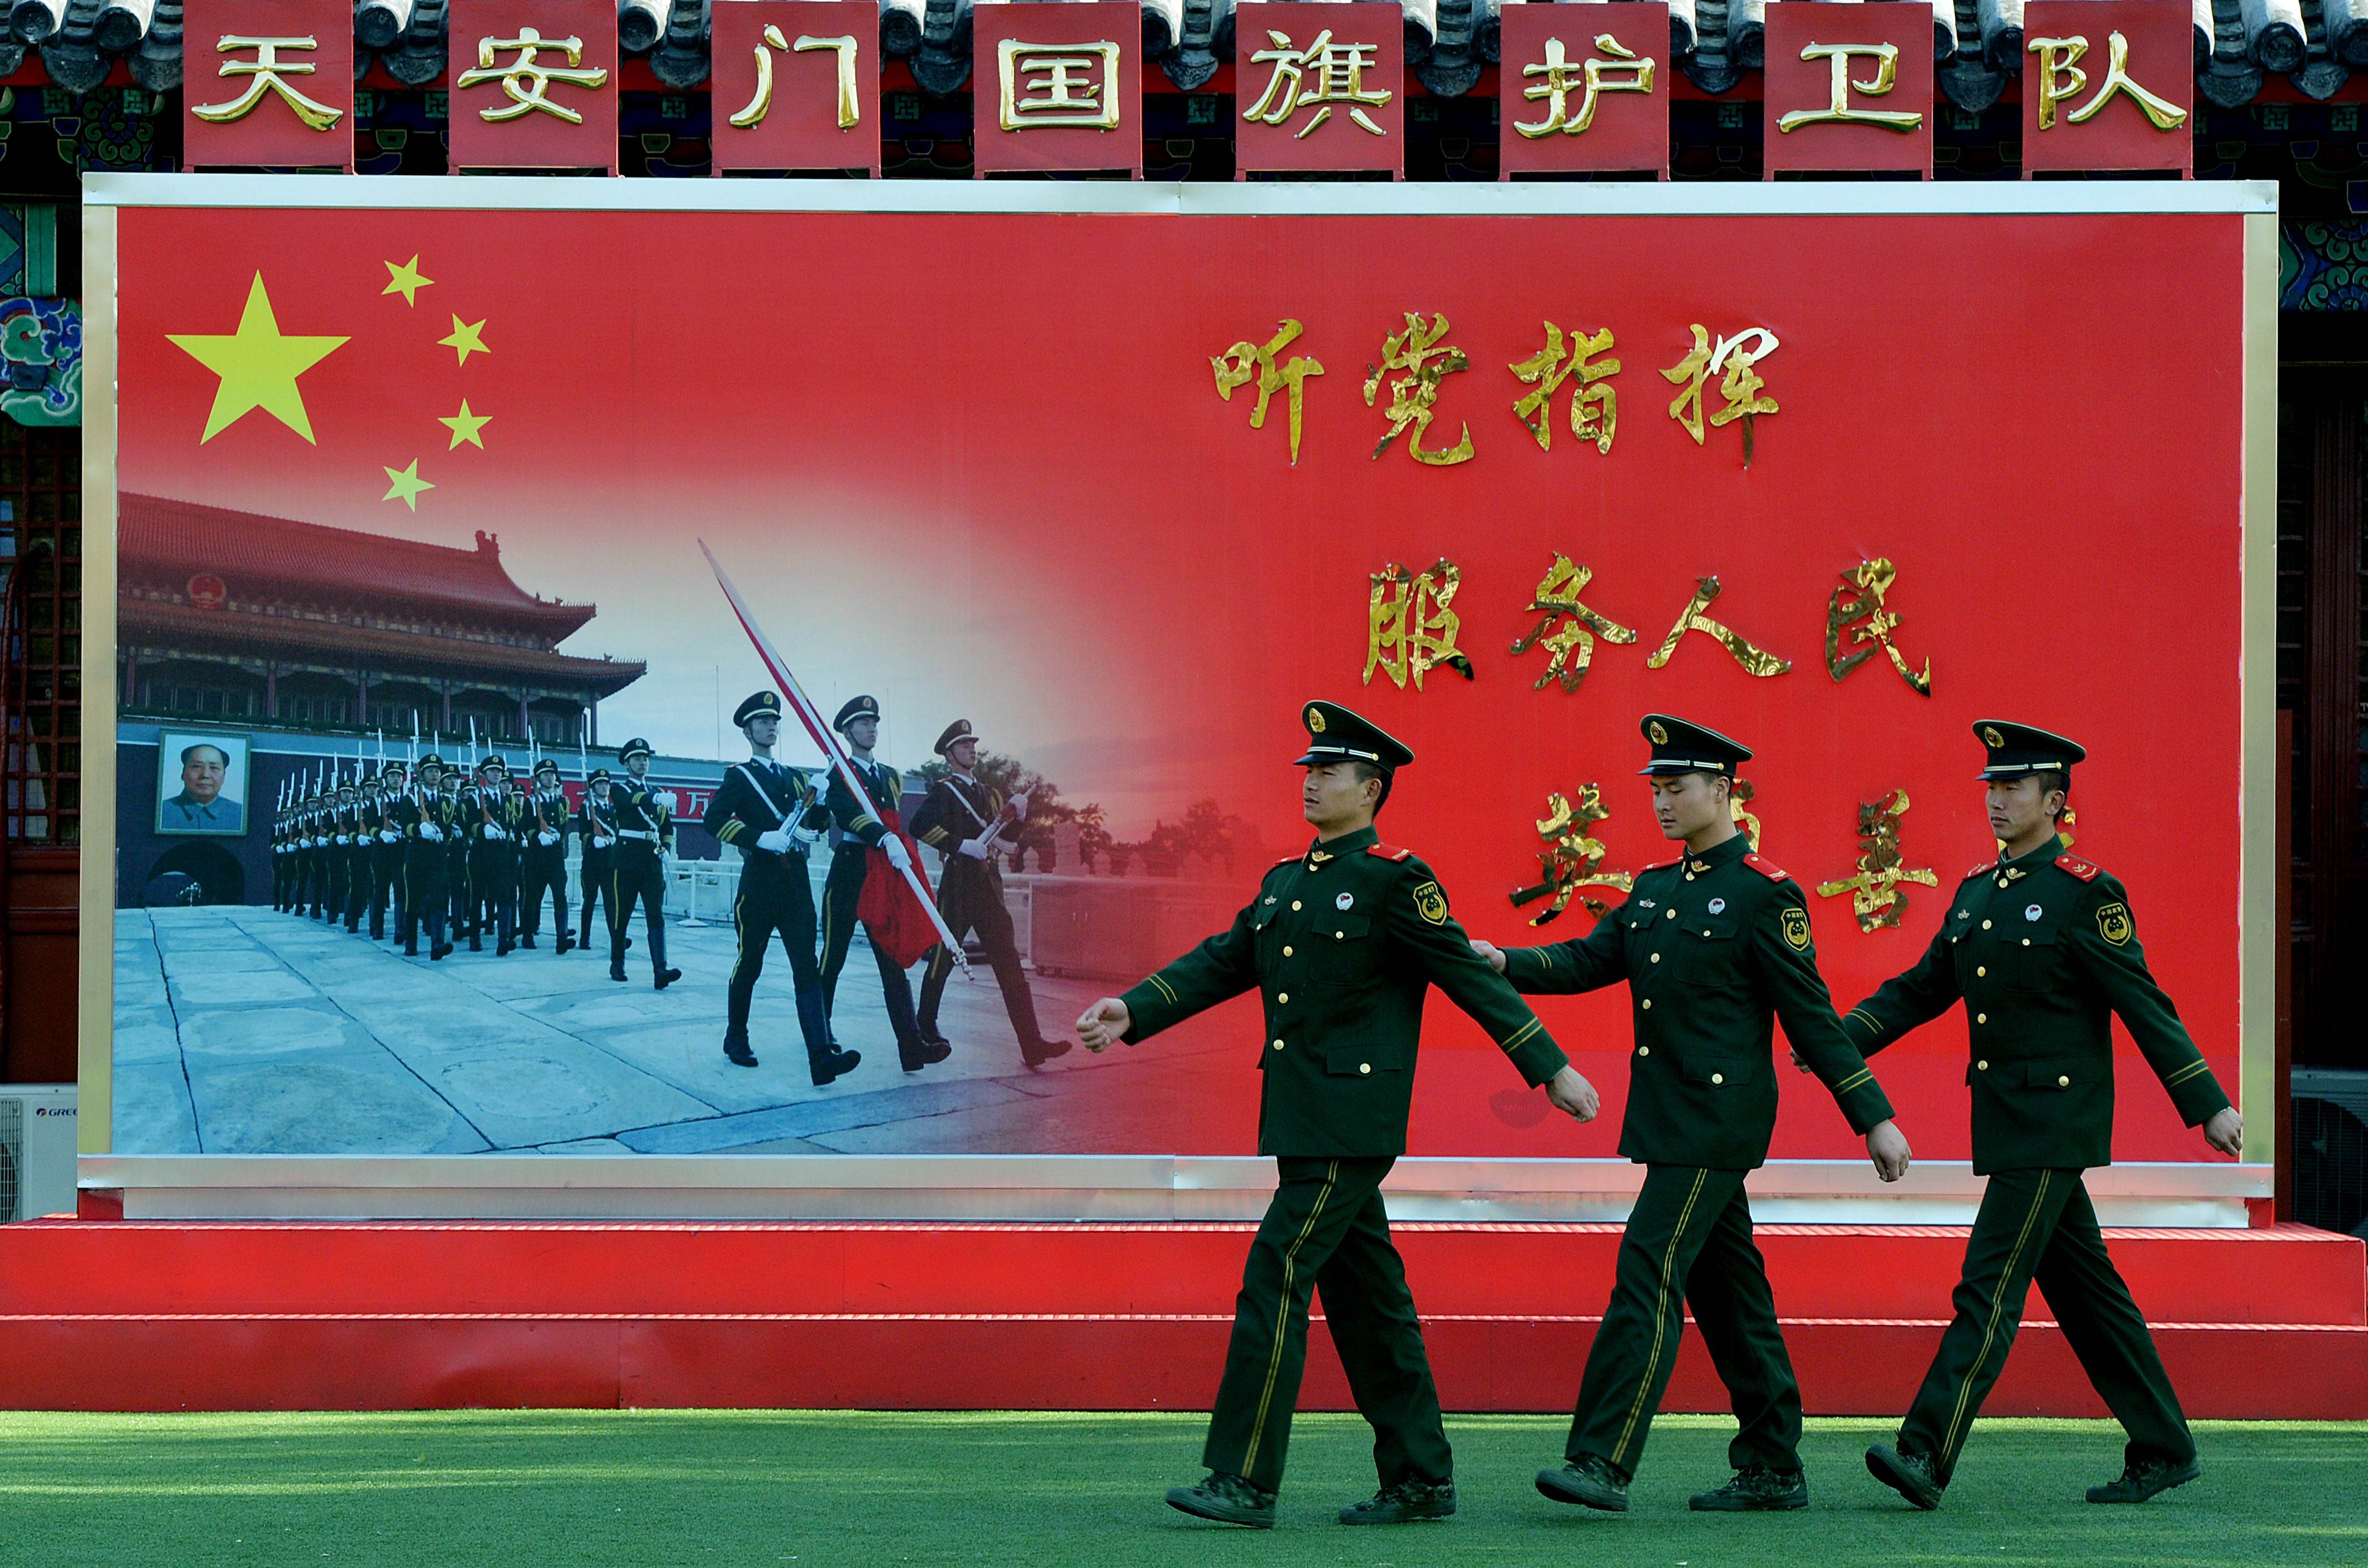 Communist Party has issued a new regulation to fix a long-time flaw in the system that does not allow officials to be demoted unless they violate party rules or Chinese law. Photo: AFP